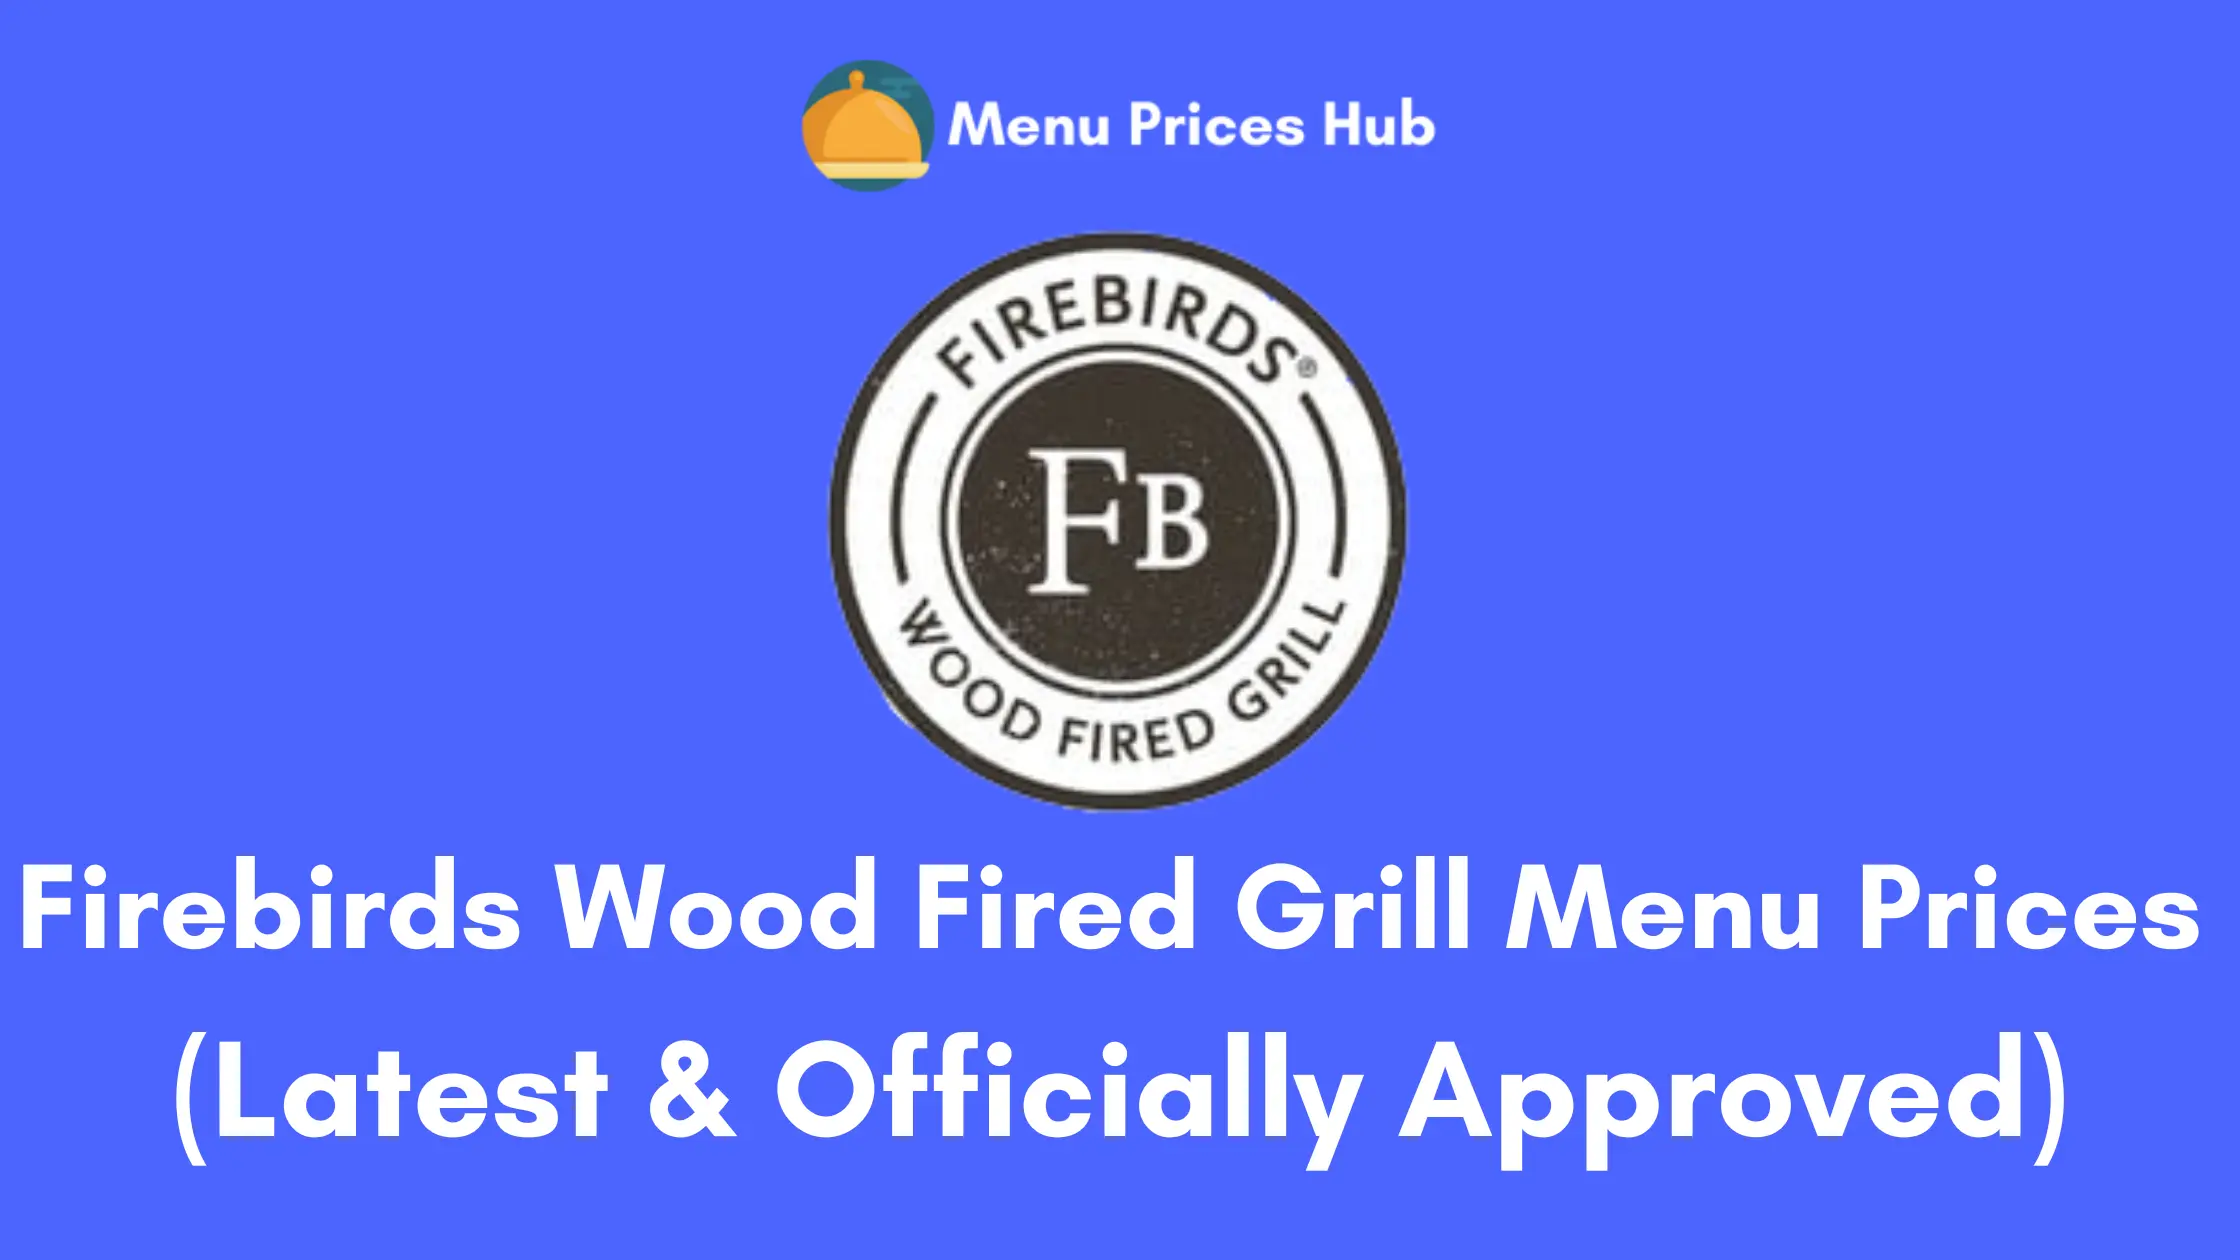 Firebirds Wood Fired Grill Menu Prices